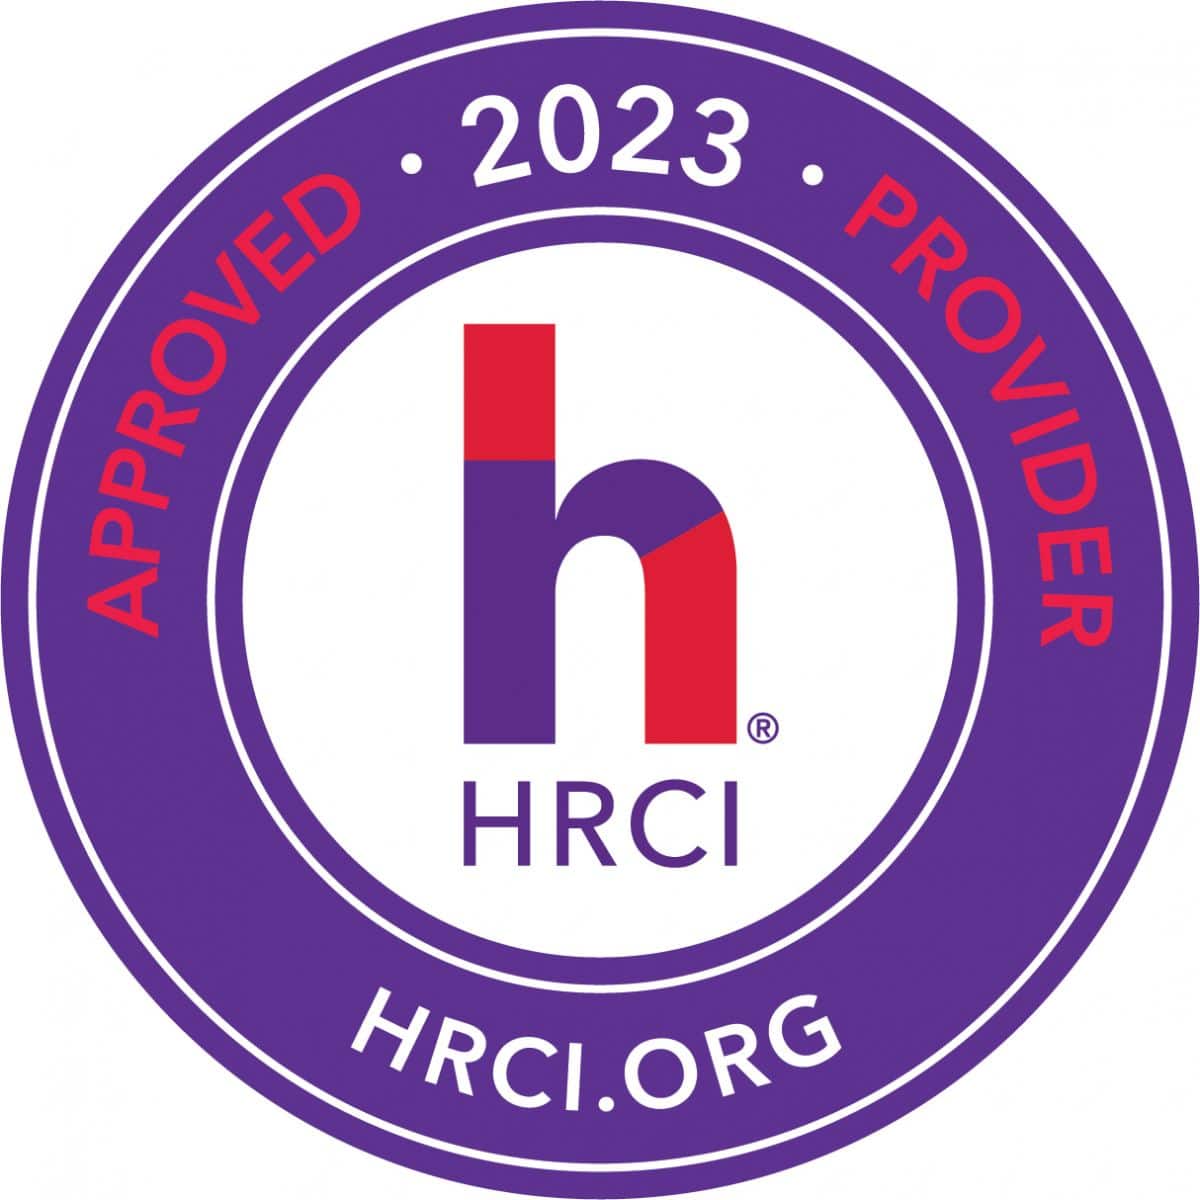 HRCI logo showing approved provider Cream of the Crop Leaders offering recertification credits to HR leaders, creamofthecropleaders.com